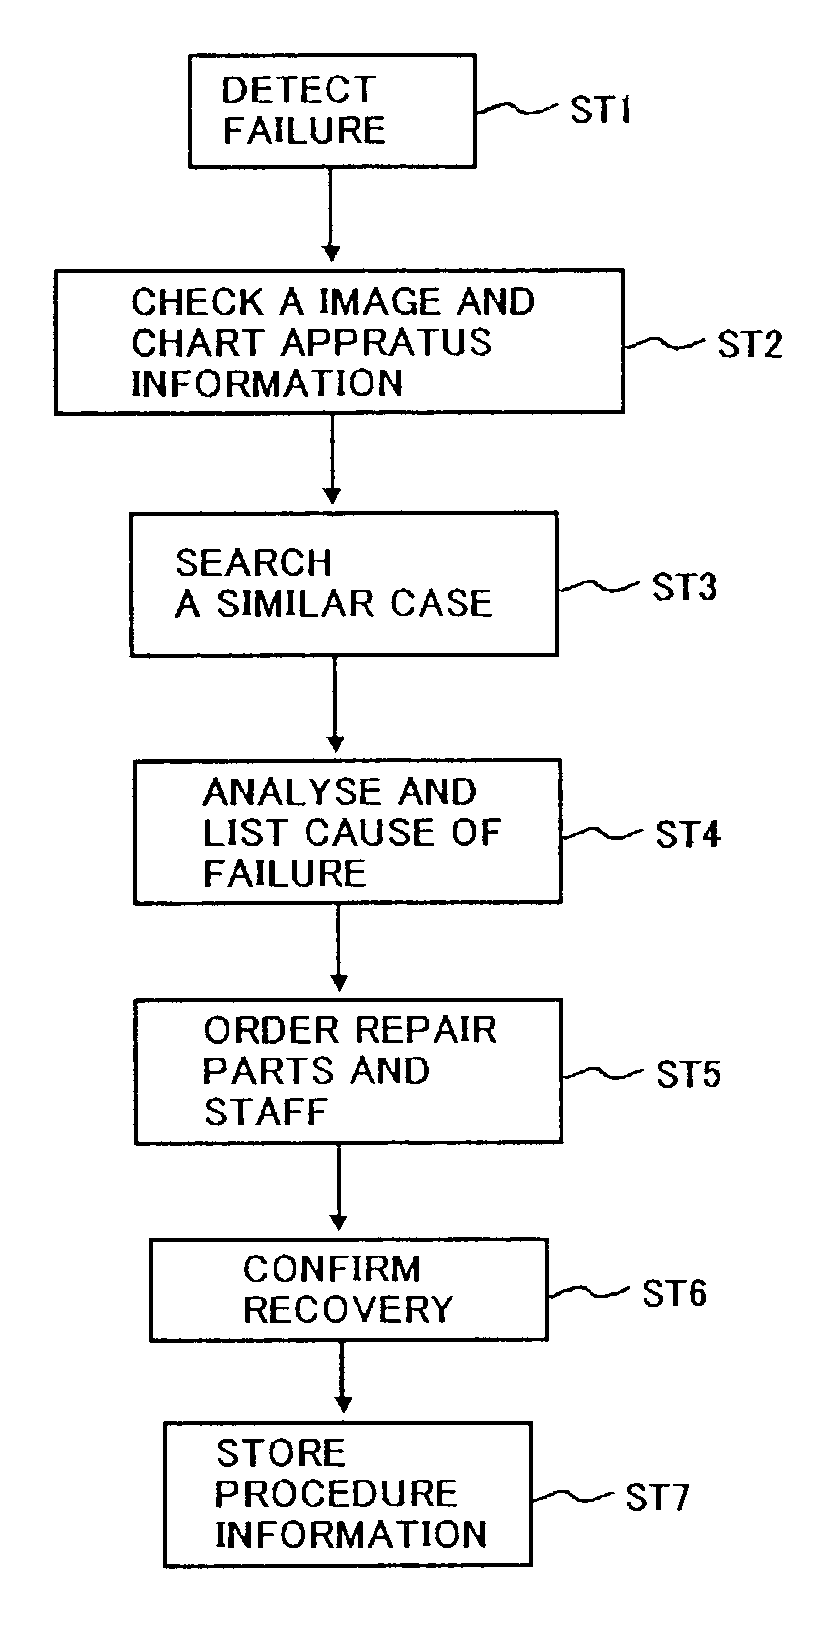 System, method and apparatus for MRI maintenance and support